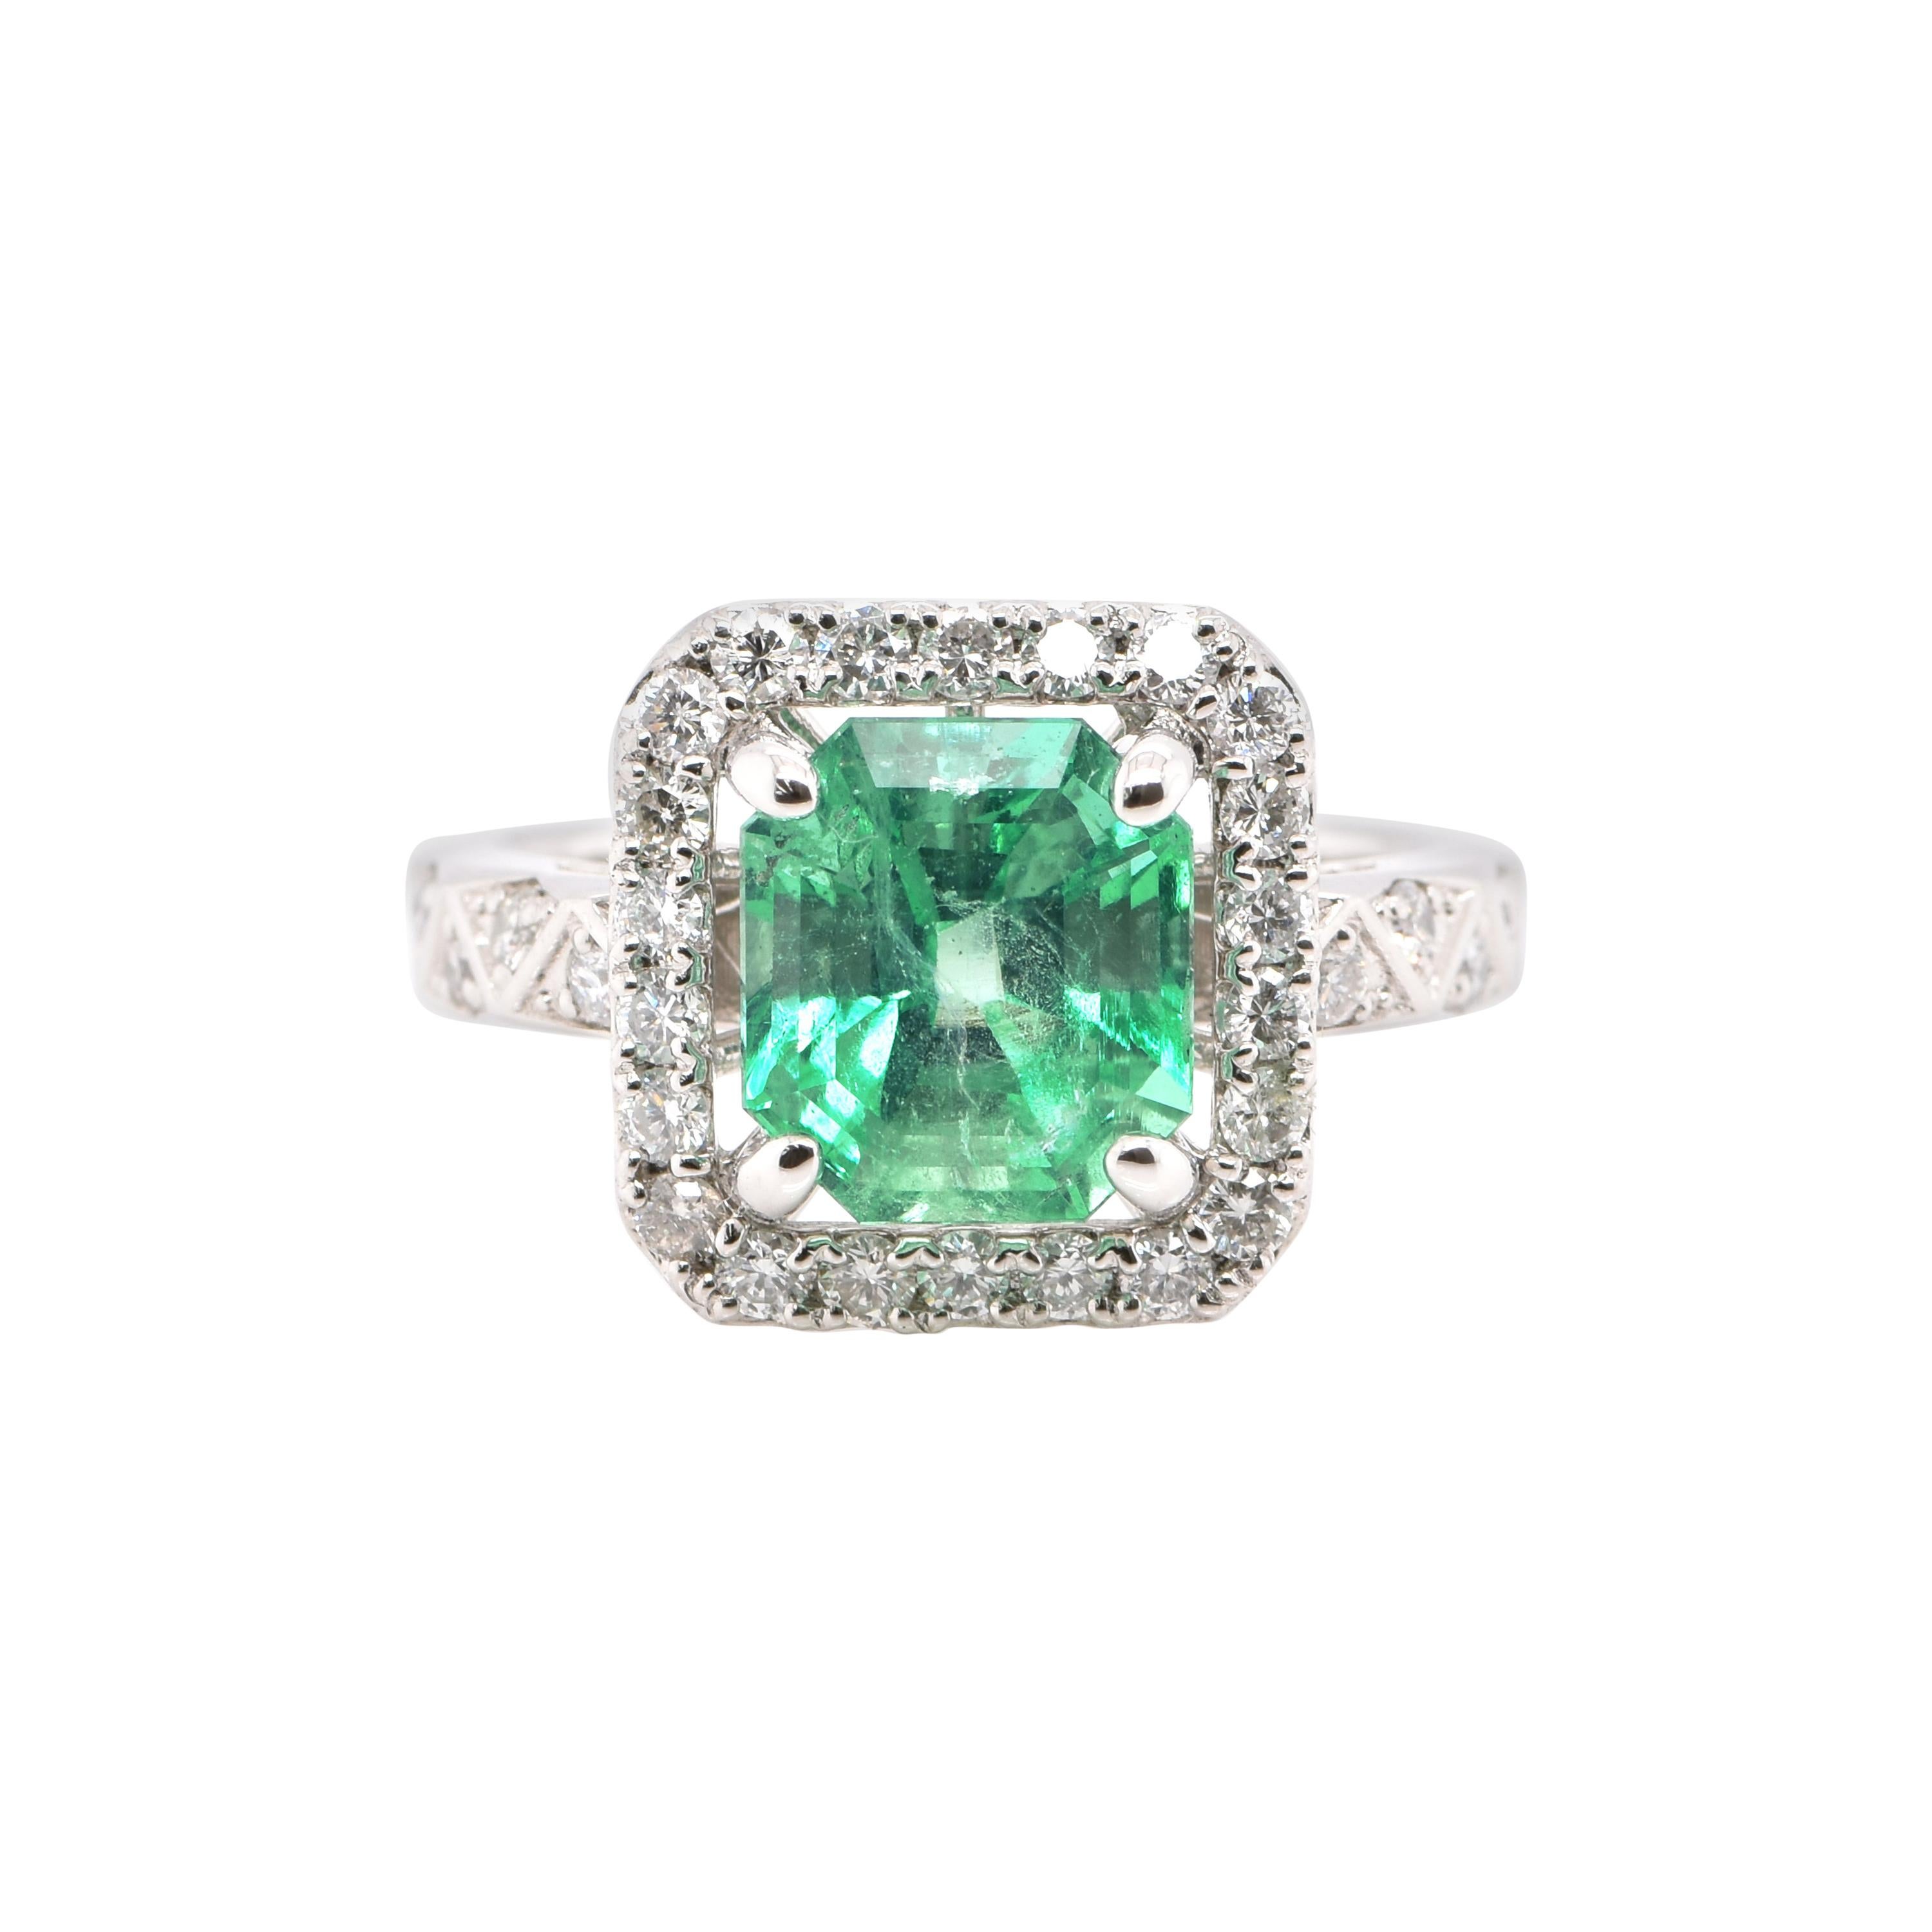 2.48 Carat, Natural, Colombian Emerald and Diamond Ring Set in Platinum